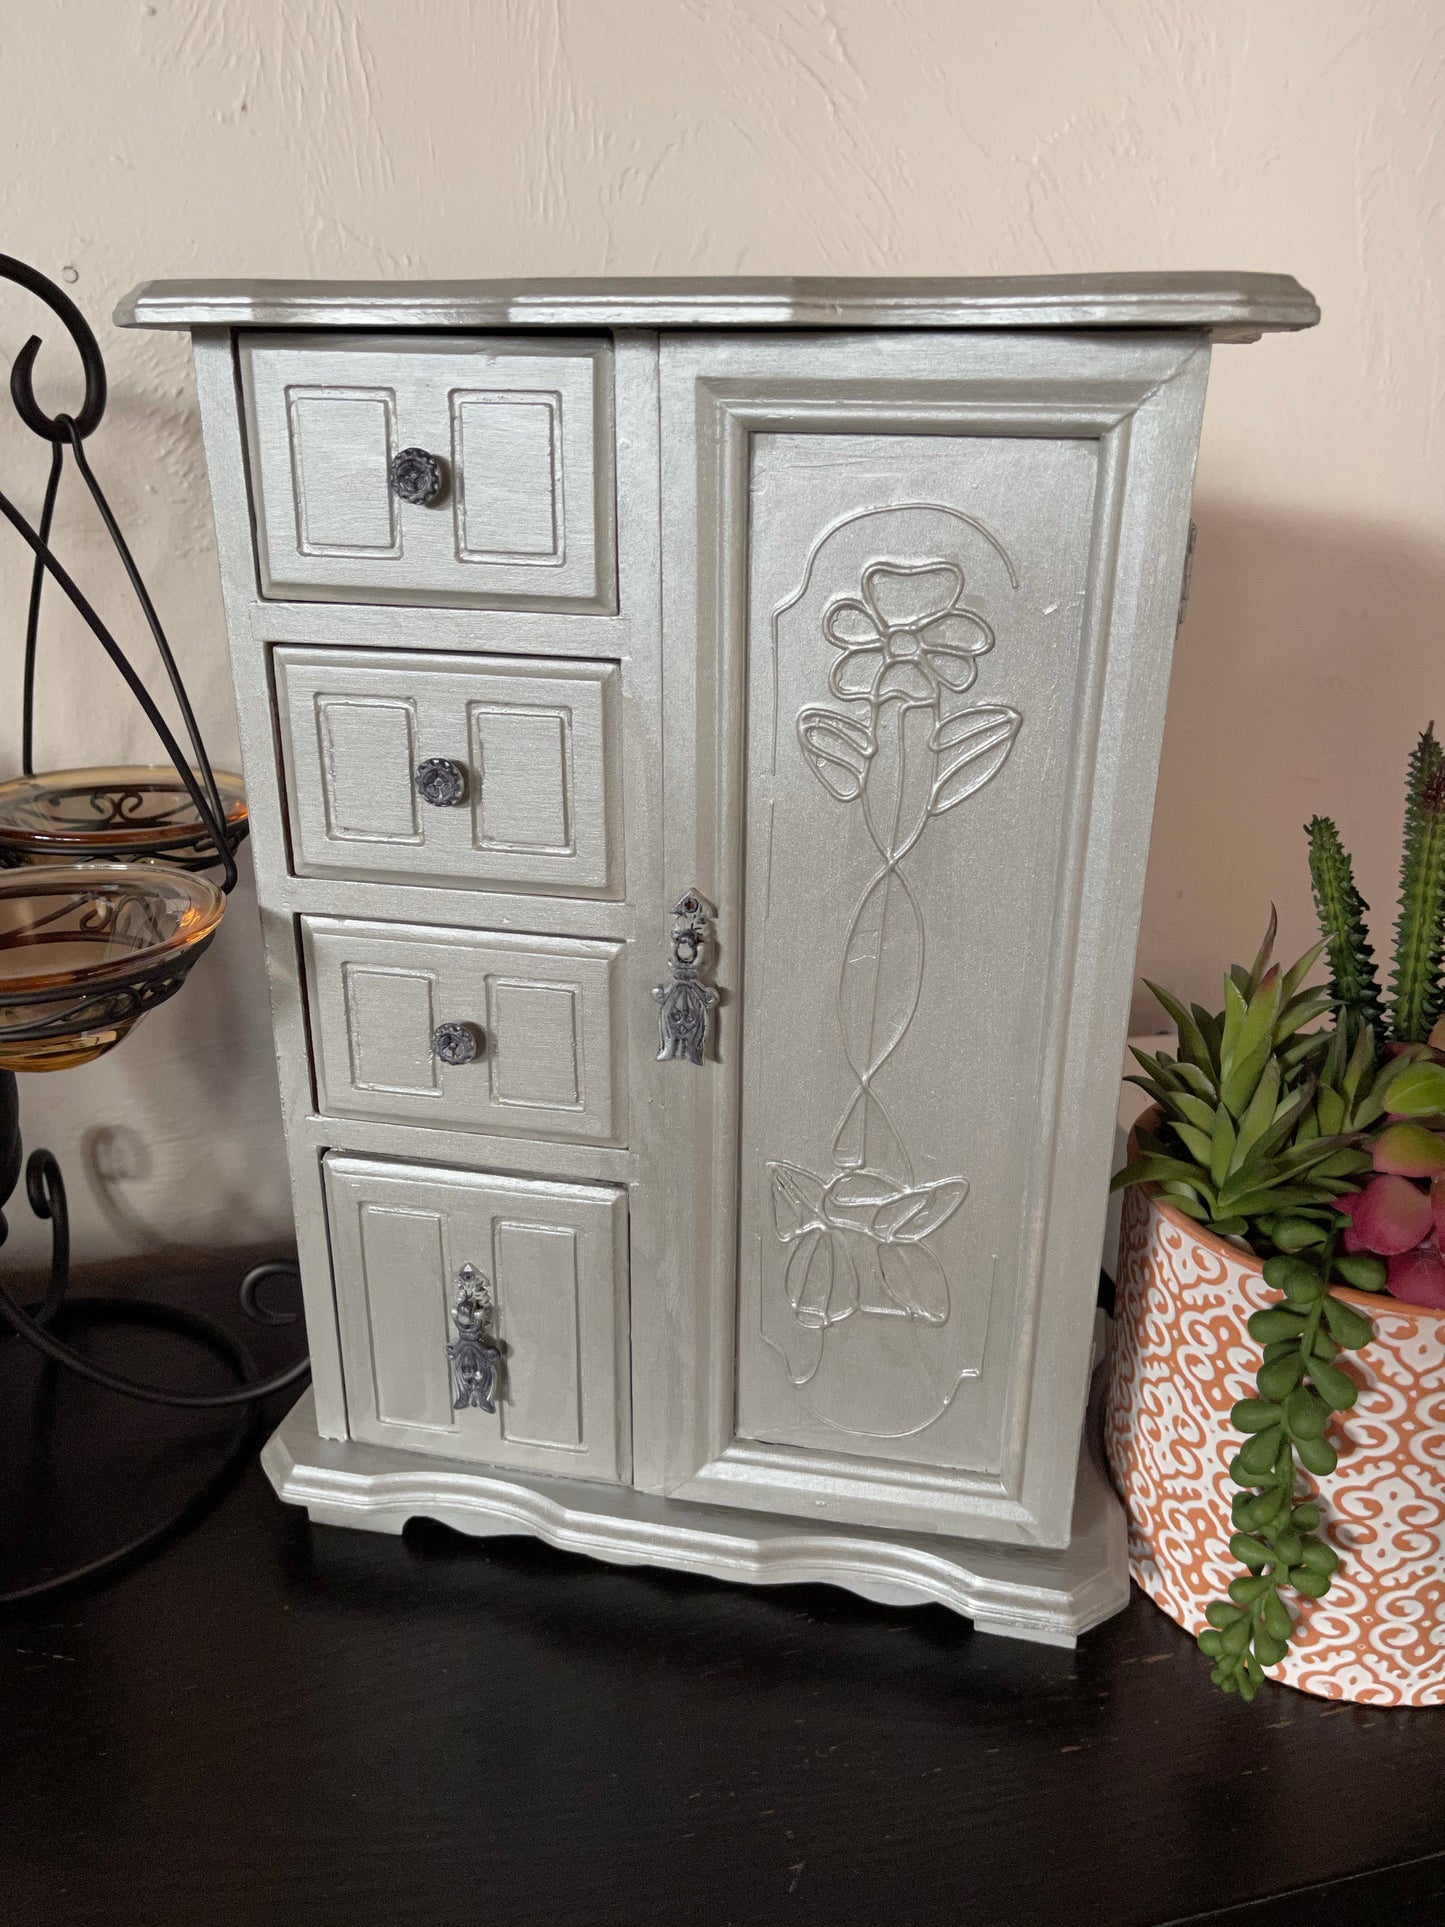 Moondust Jewelry Cabinet, Lovecycled Cabinet